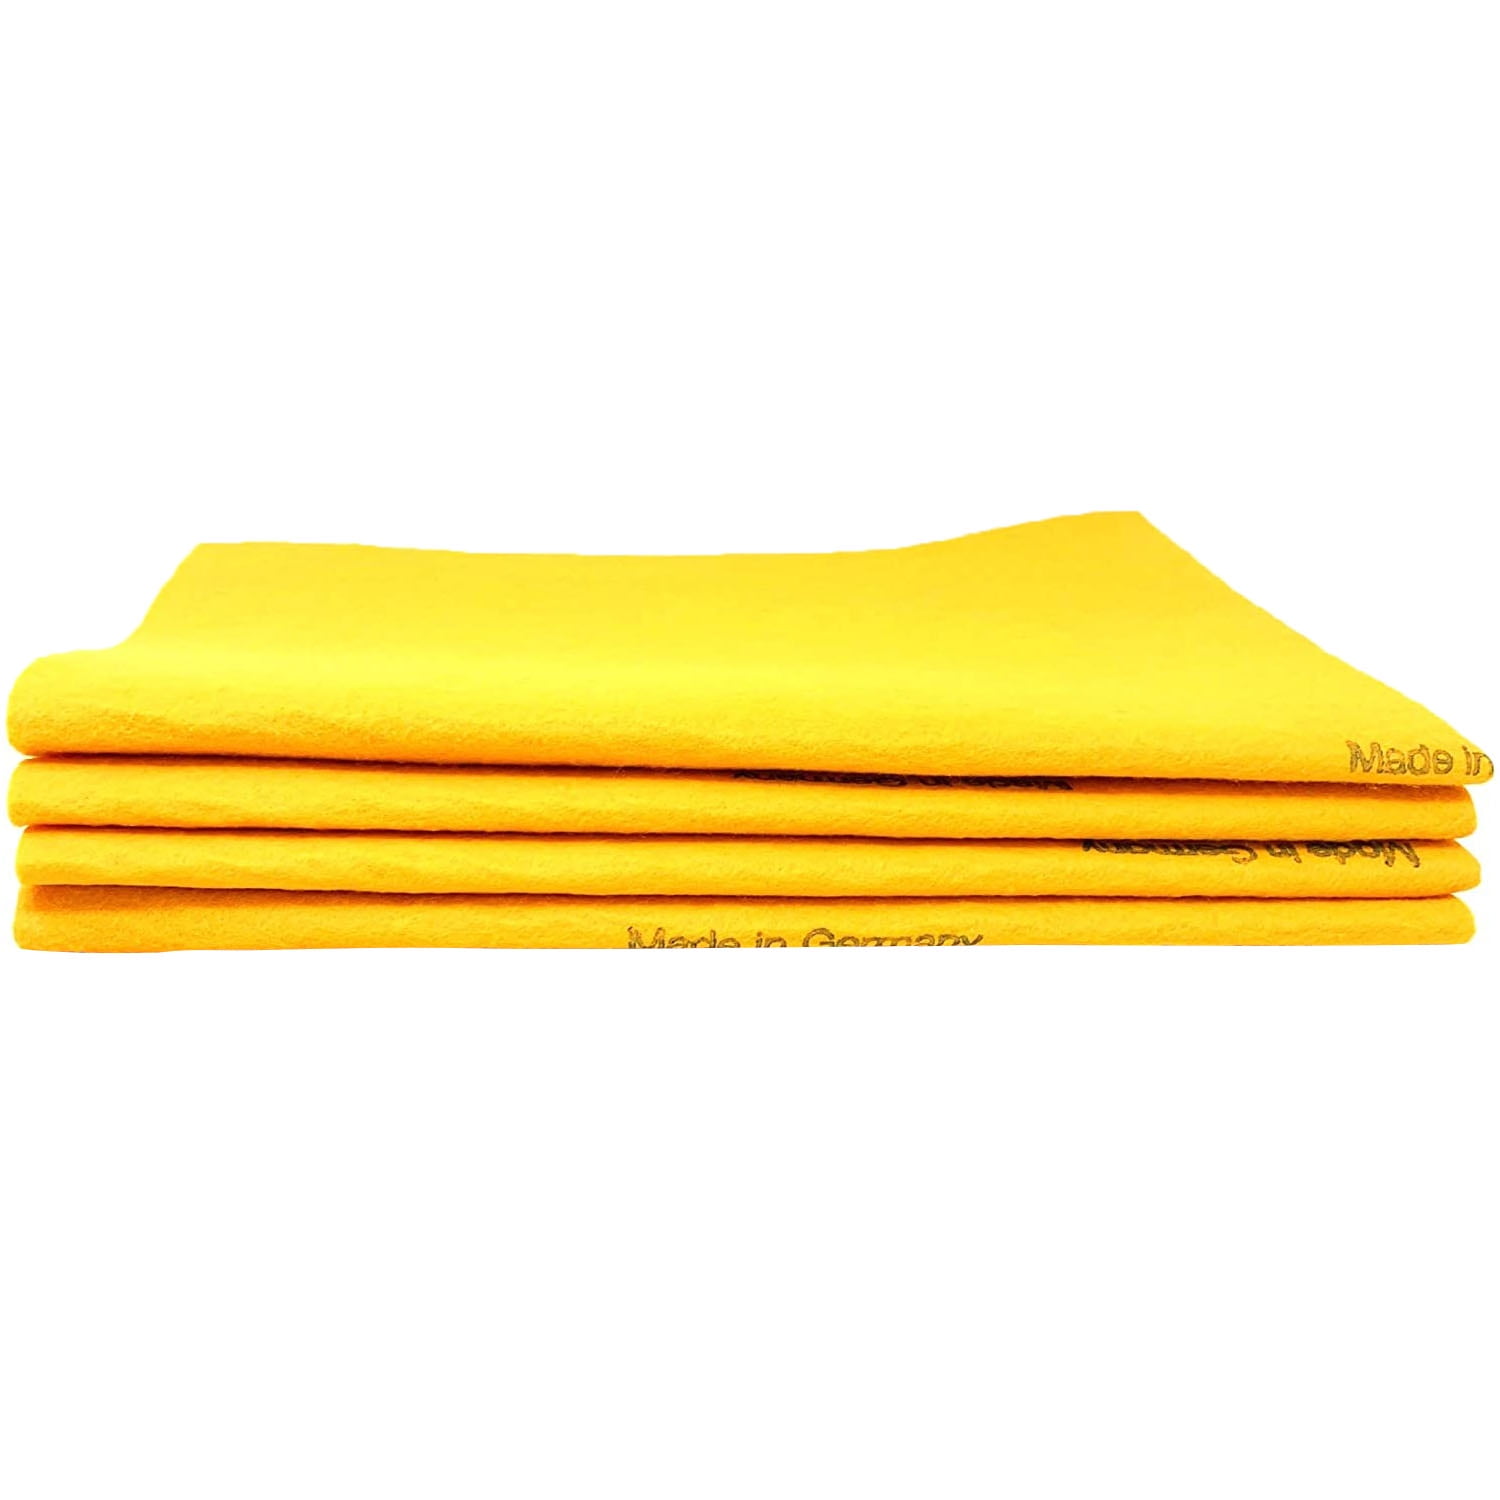 3 pcs German Absorbent Cloth Shammy German towels Household Clean Cloth washable 